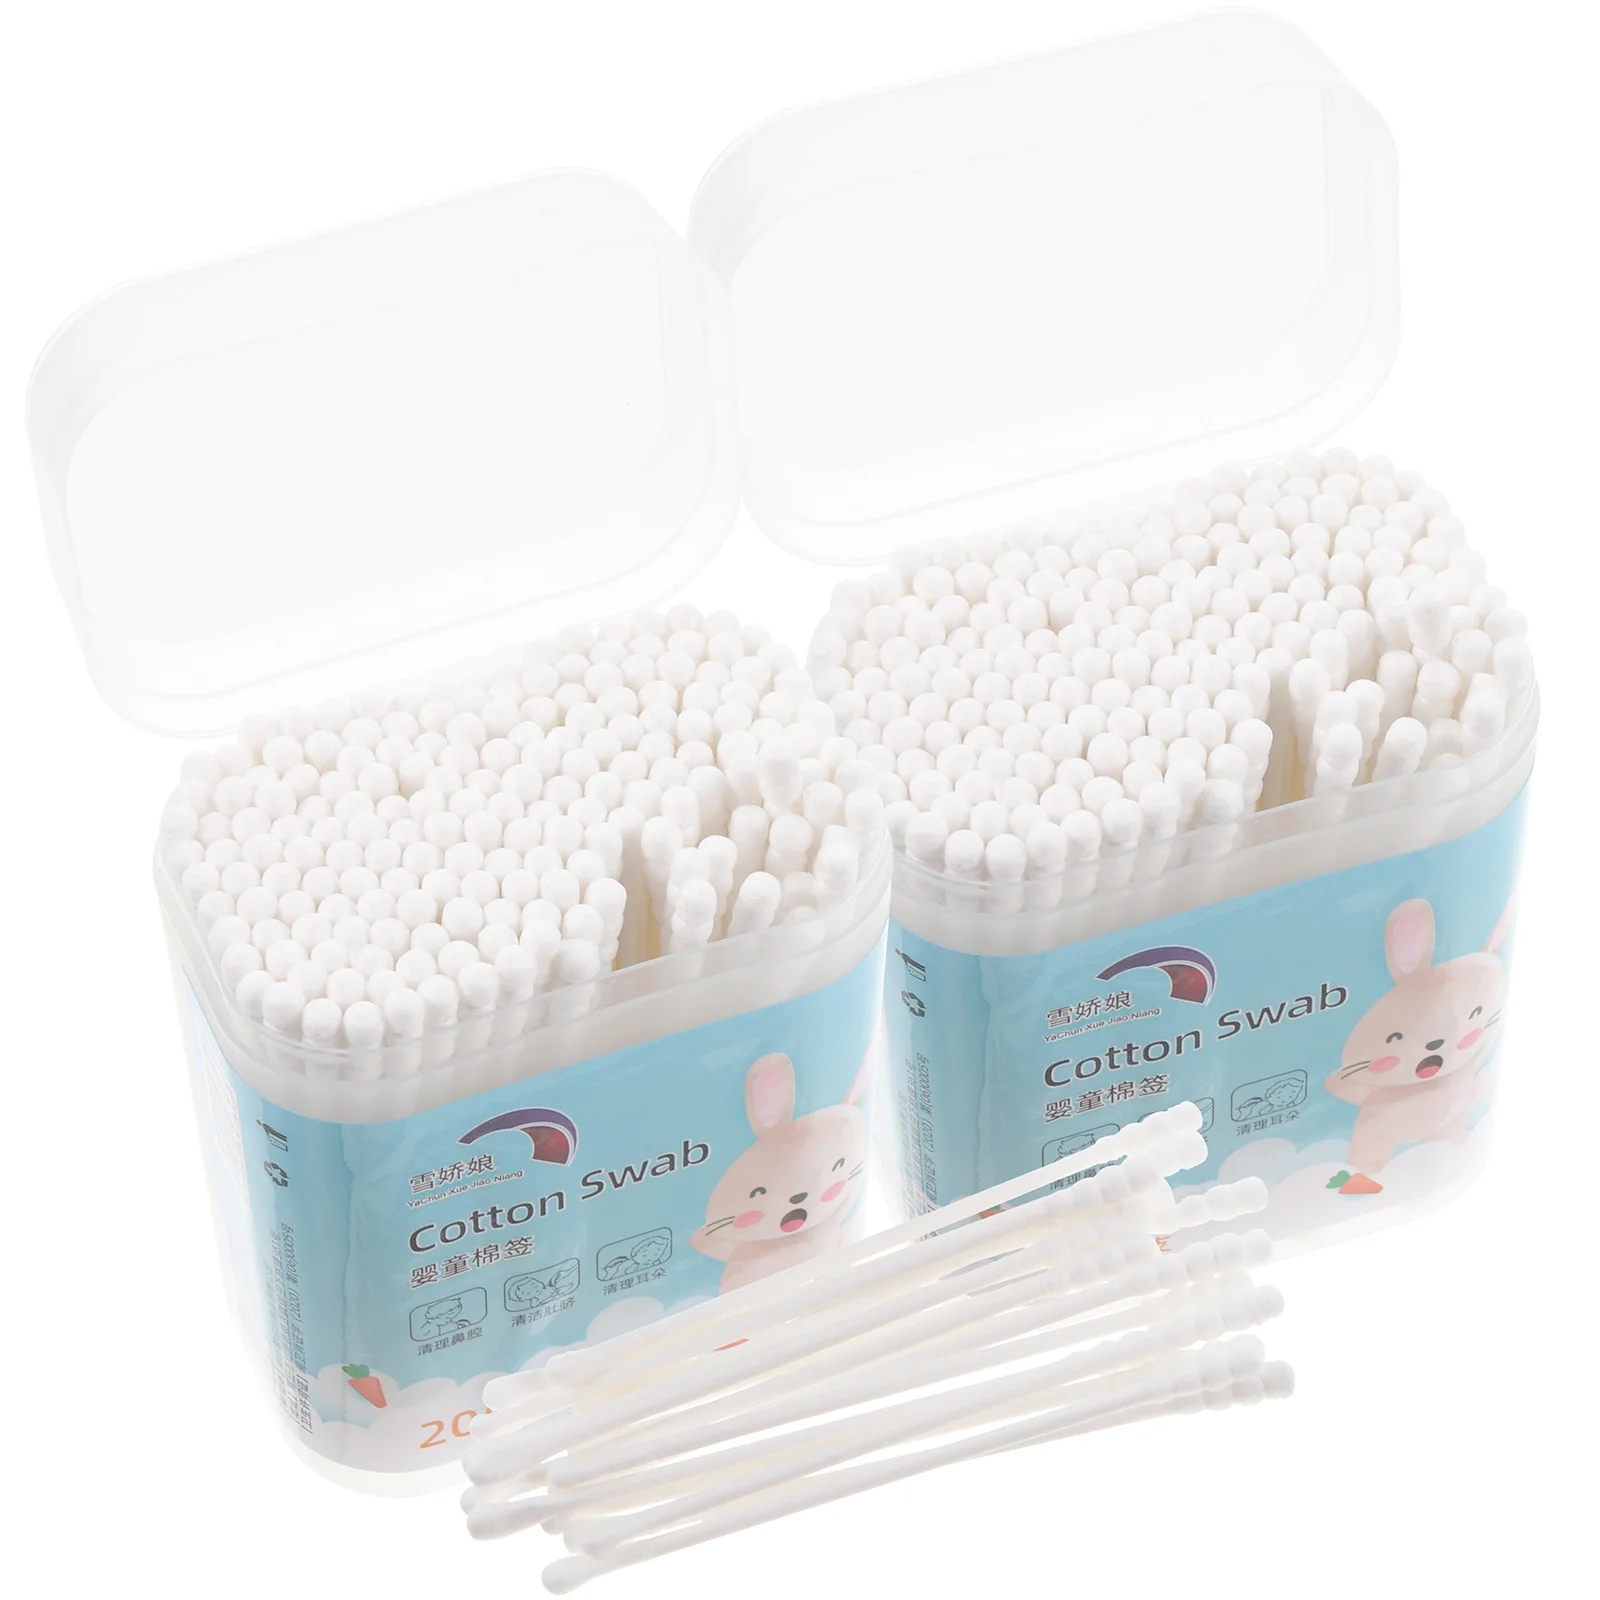 

400PCS/2 Boxes Infant Nose Swabs Paper Sticks Cotton Buds Baby Care Buds Swabs Ear Infant Nasal Infant Cleaning Sticks